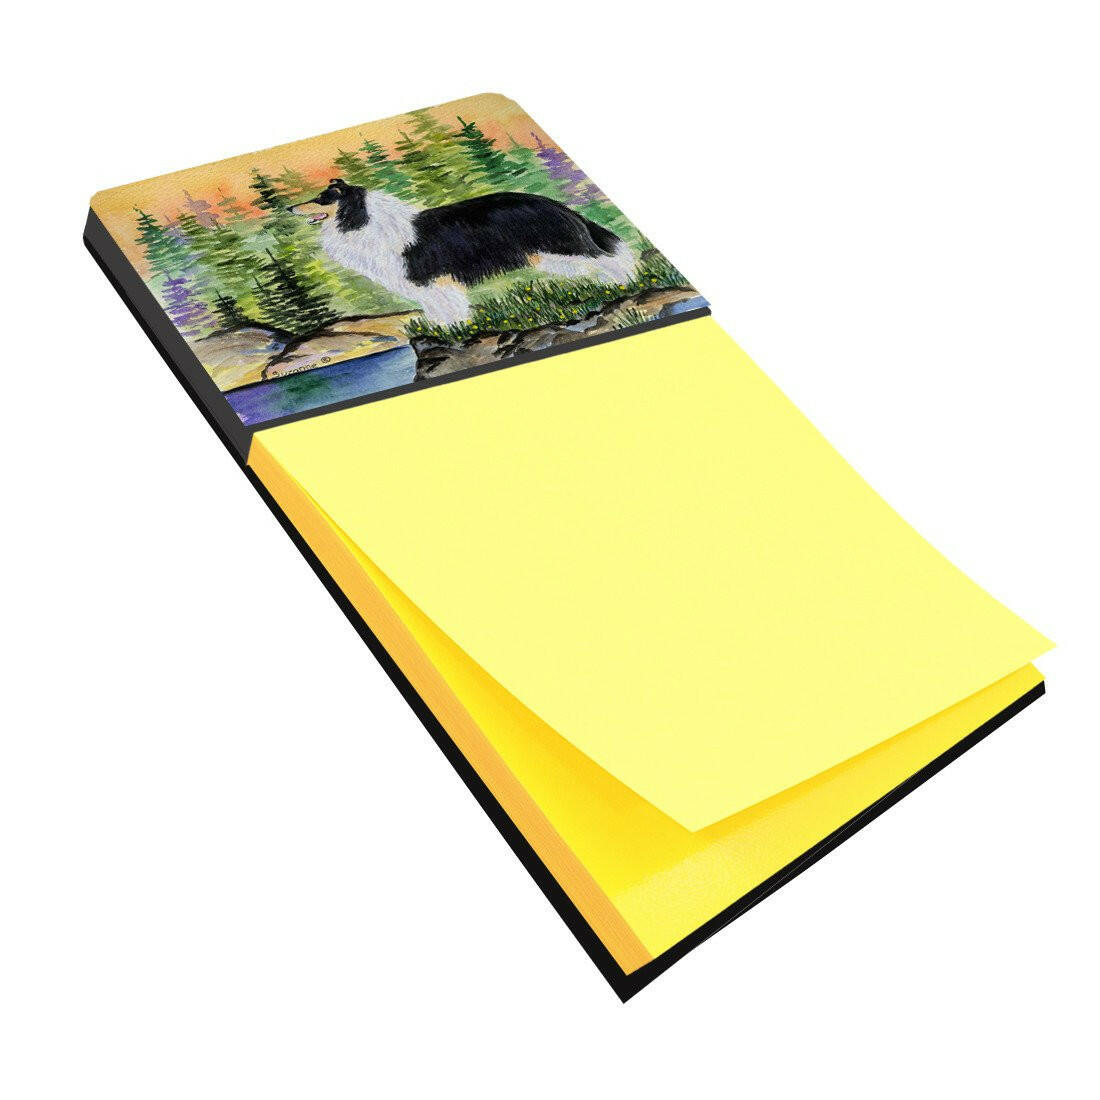 Collie Refiillable Sticky Note Holder or Postit Note Dispenser SS8203SN by Caroline's Treasures